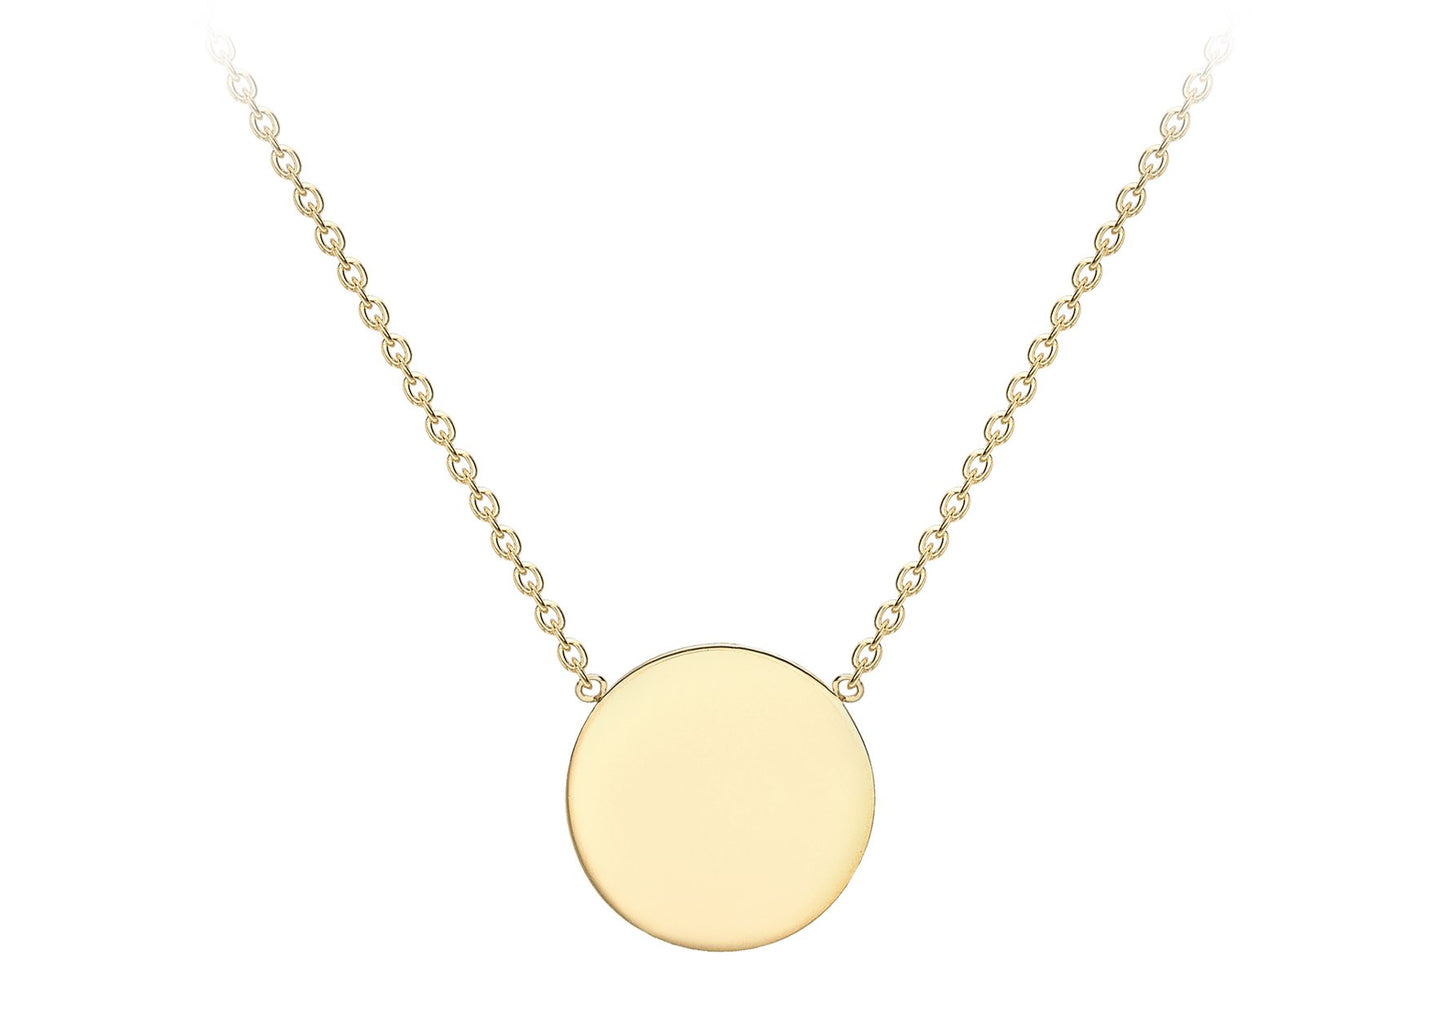 9ct Yellow Gold Small Disc Necklace